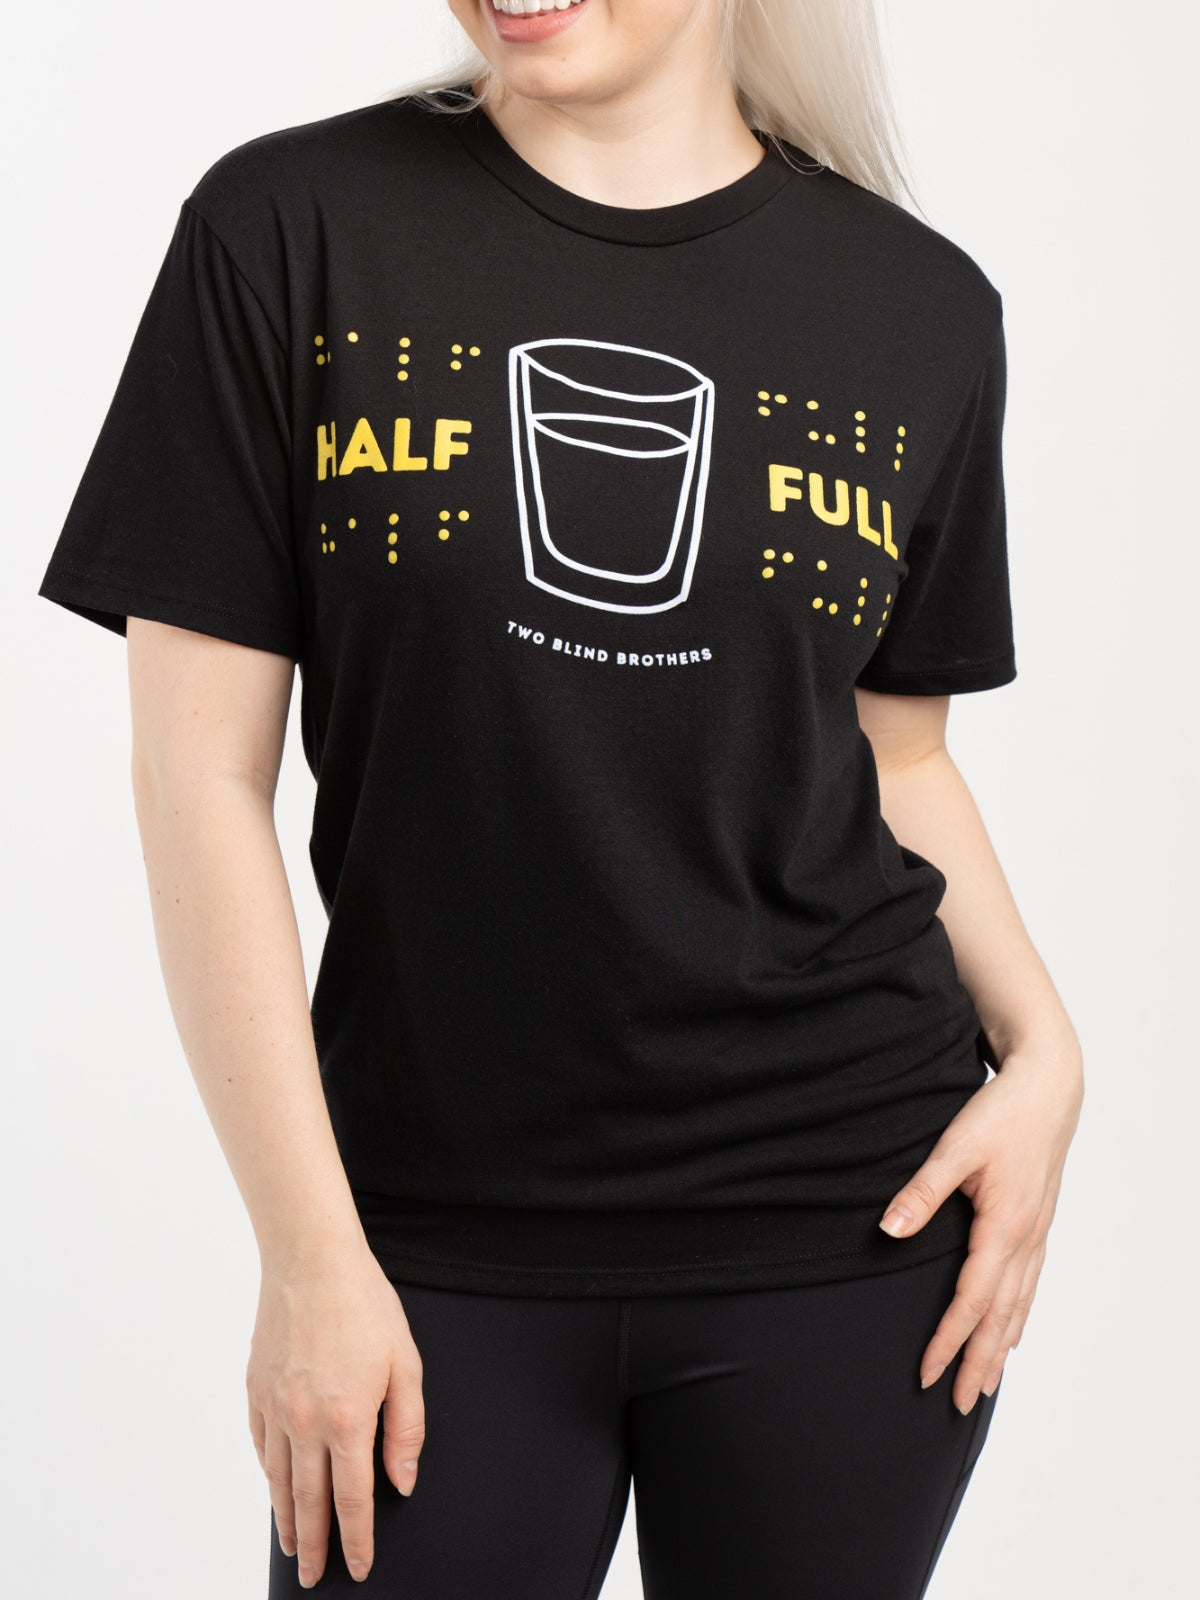 Two Blind Brothers - Womens Women's "Half Full" Graphic Crewneck Black